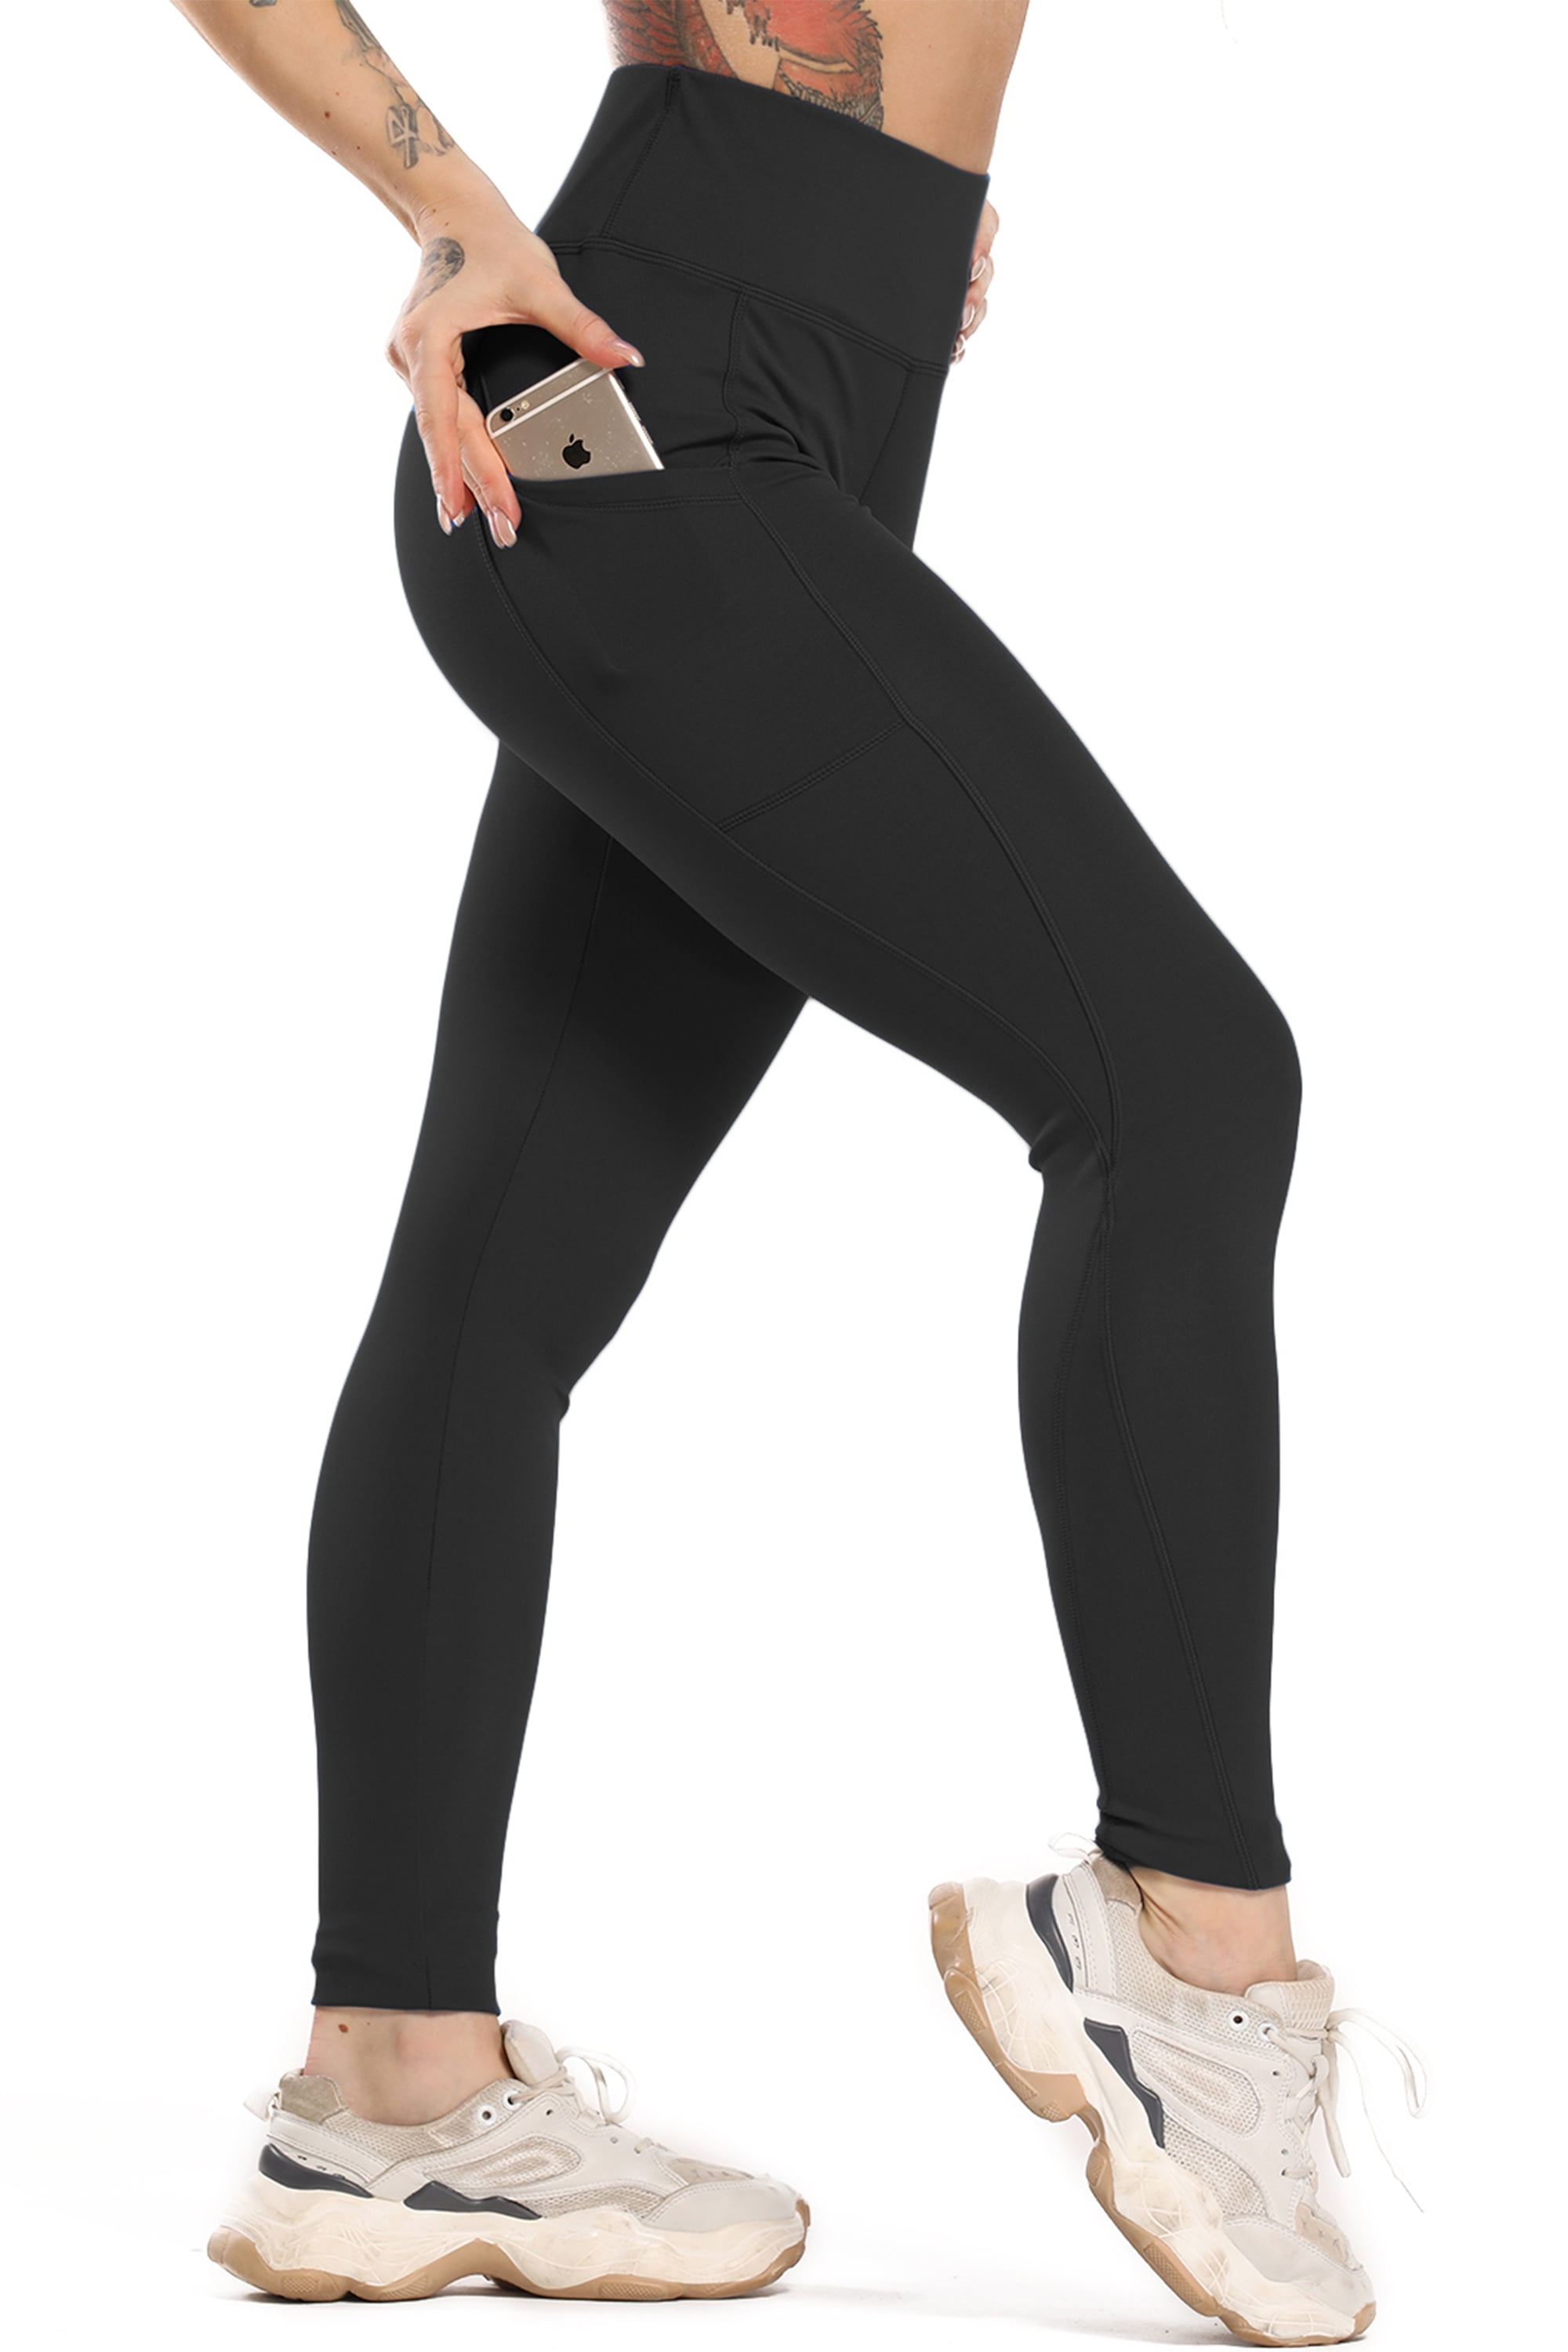 FITTOO High Waist Yoga Pants with Pockets for Women Tummy Control